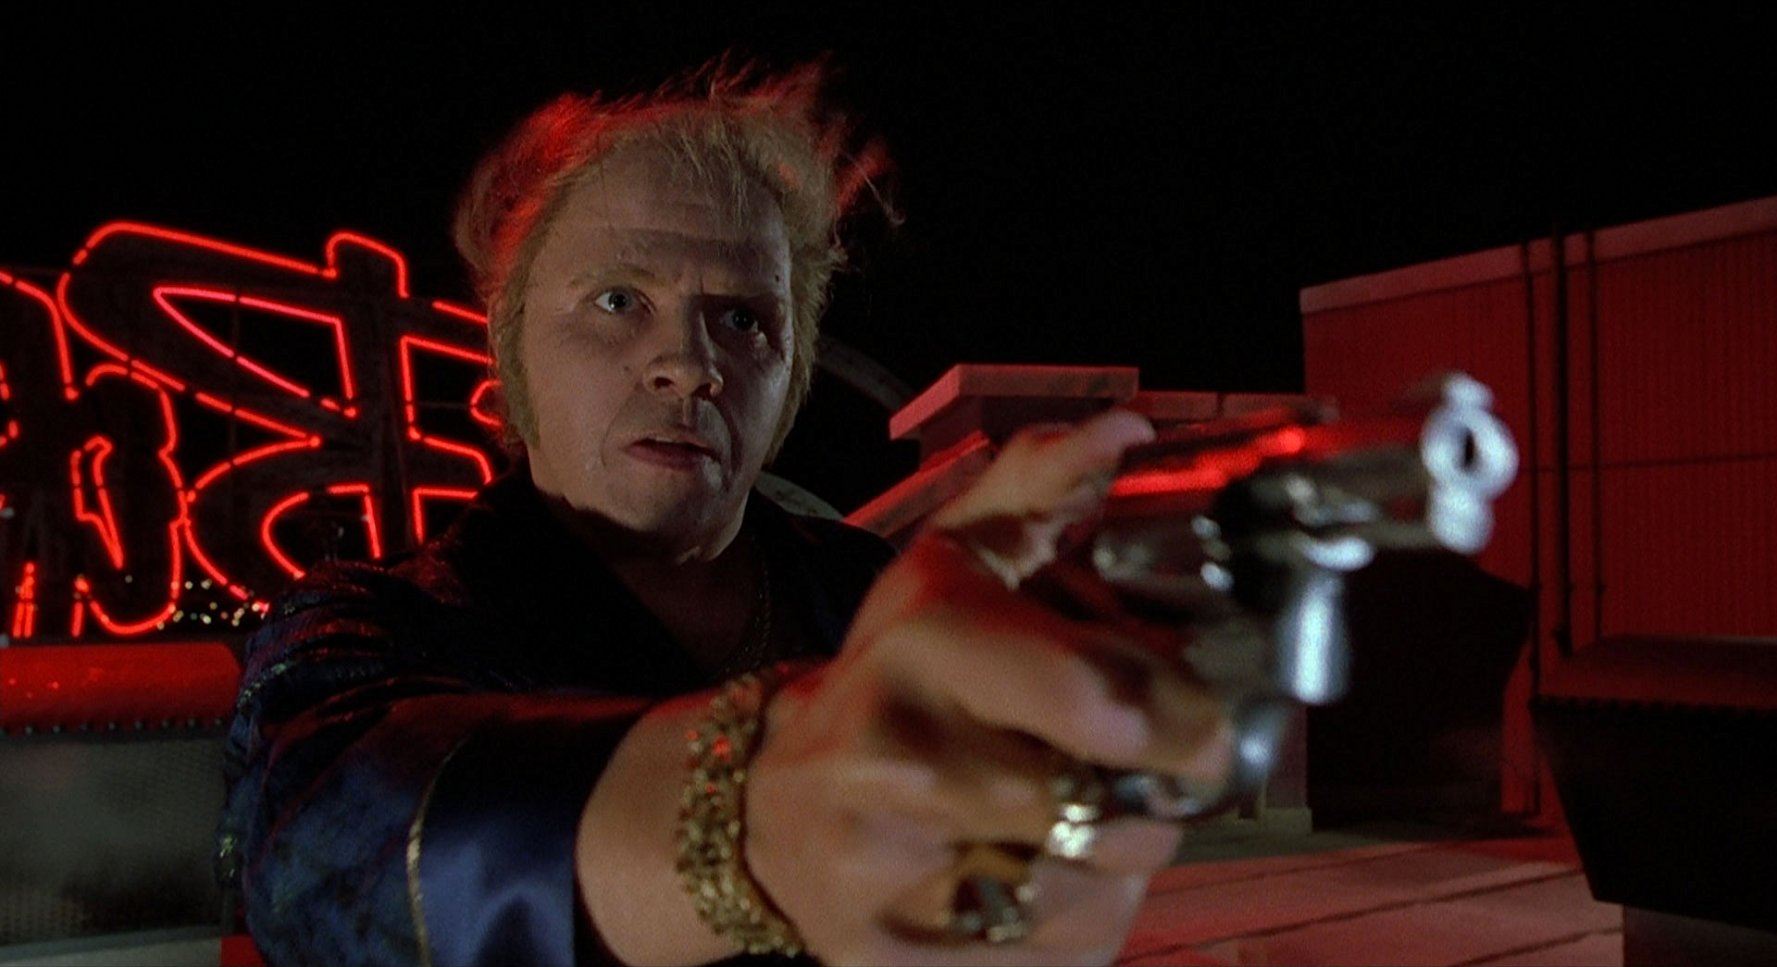 Thomas F. Wilson as Biff Tannen in Back to the Future Part II